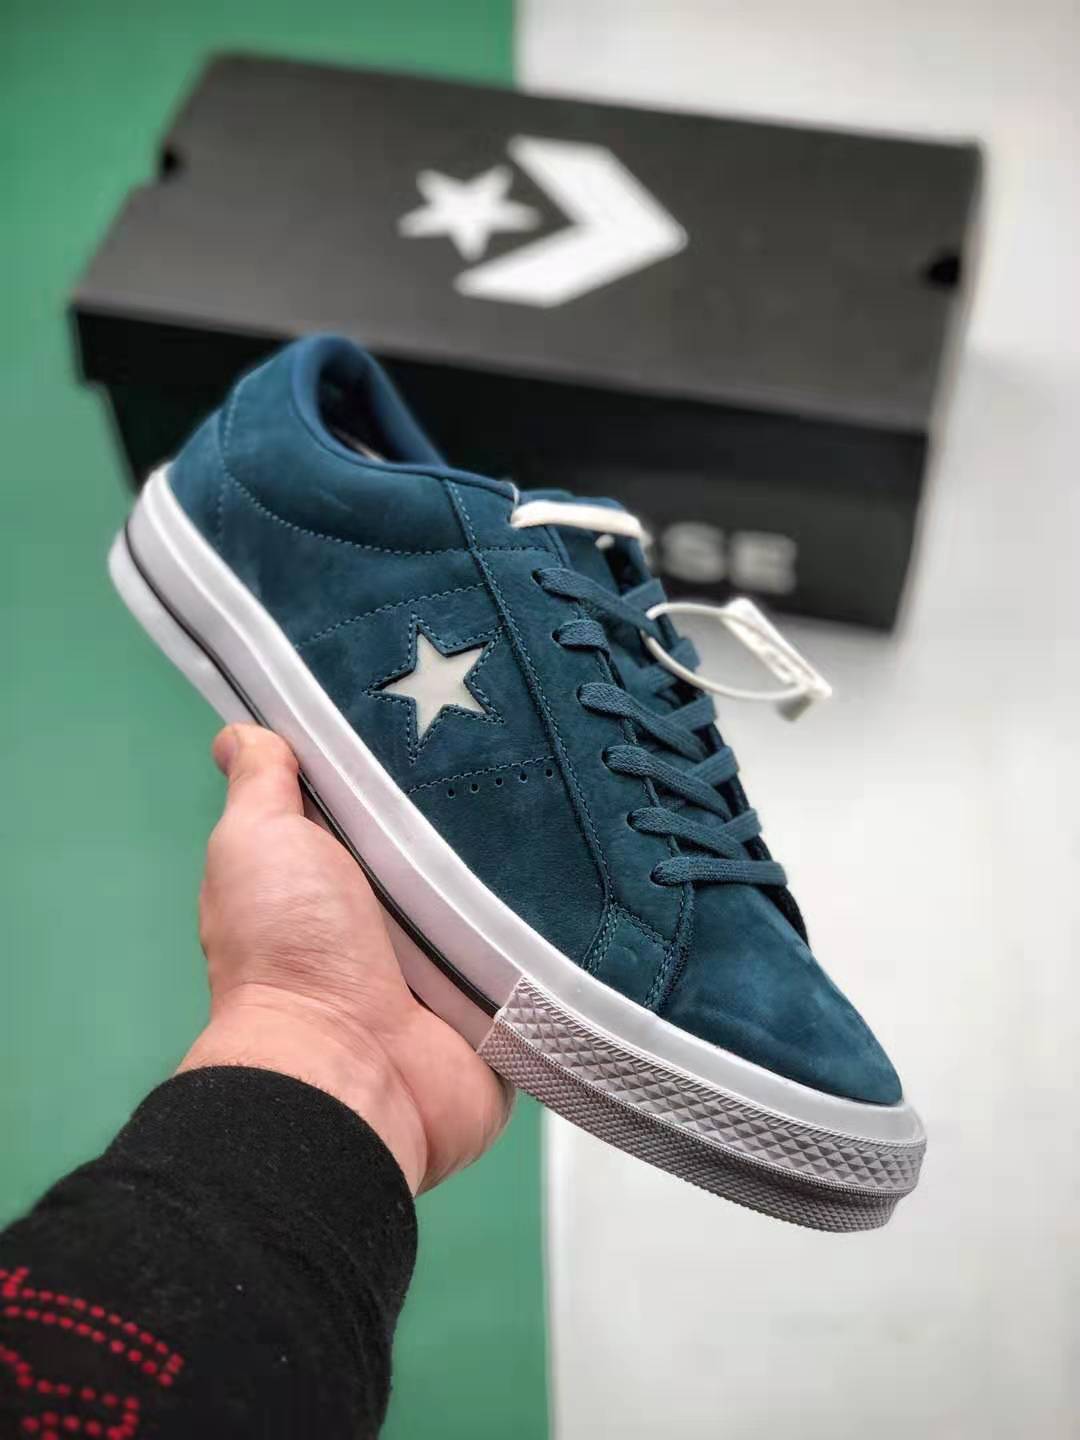 Converse One Star Blue 162616C - Classic Shoes with a Timeless Appeal